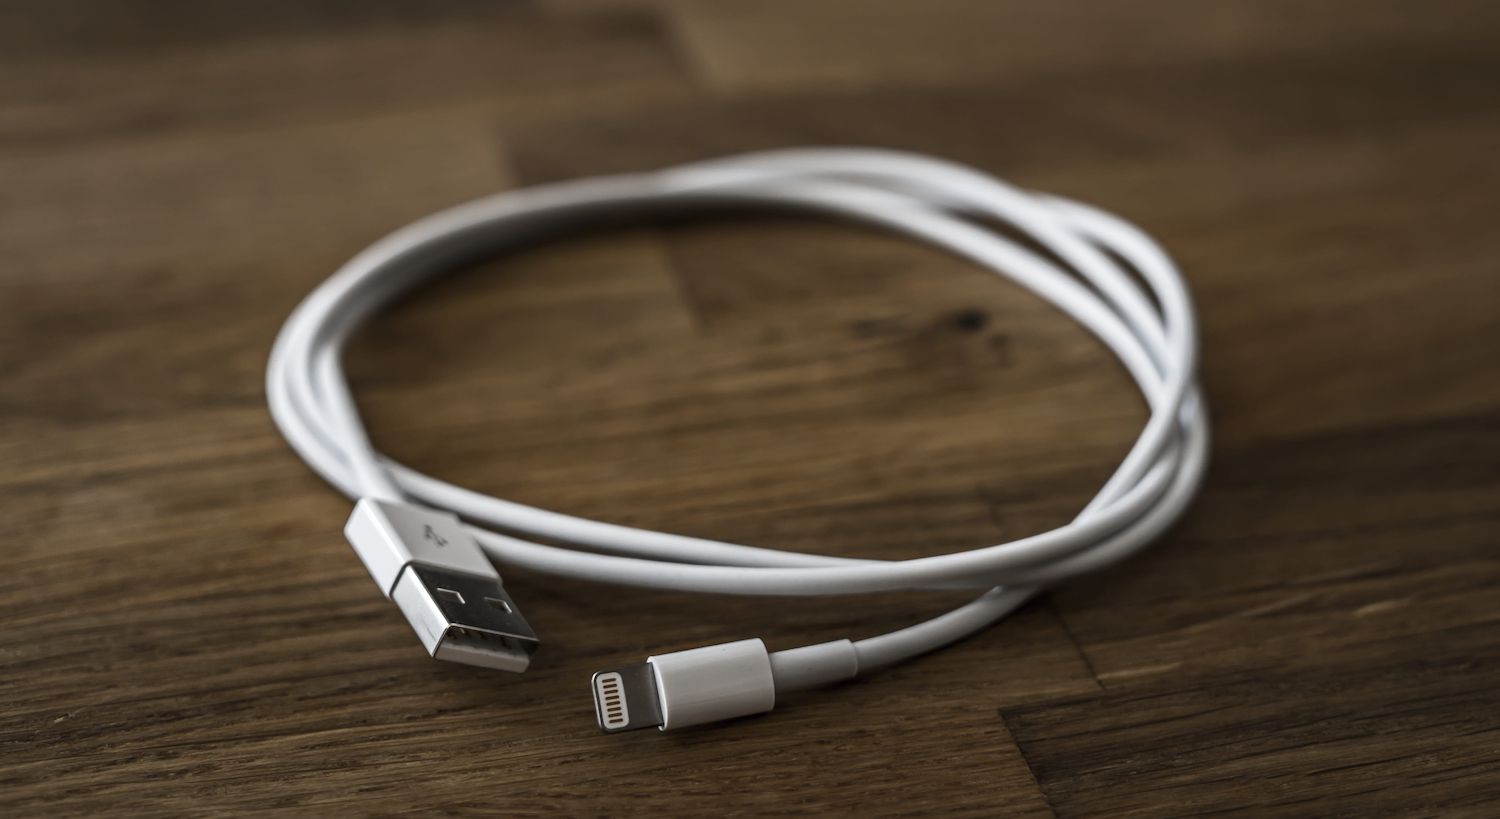 Lightning cable for the iPhone.